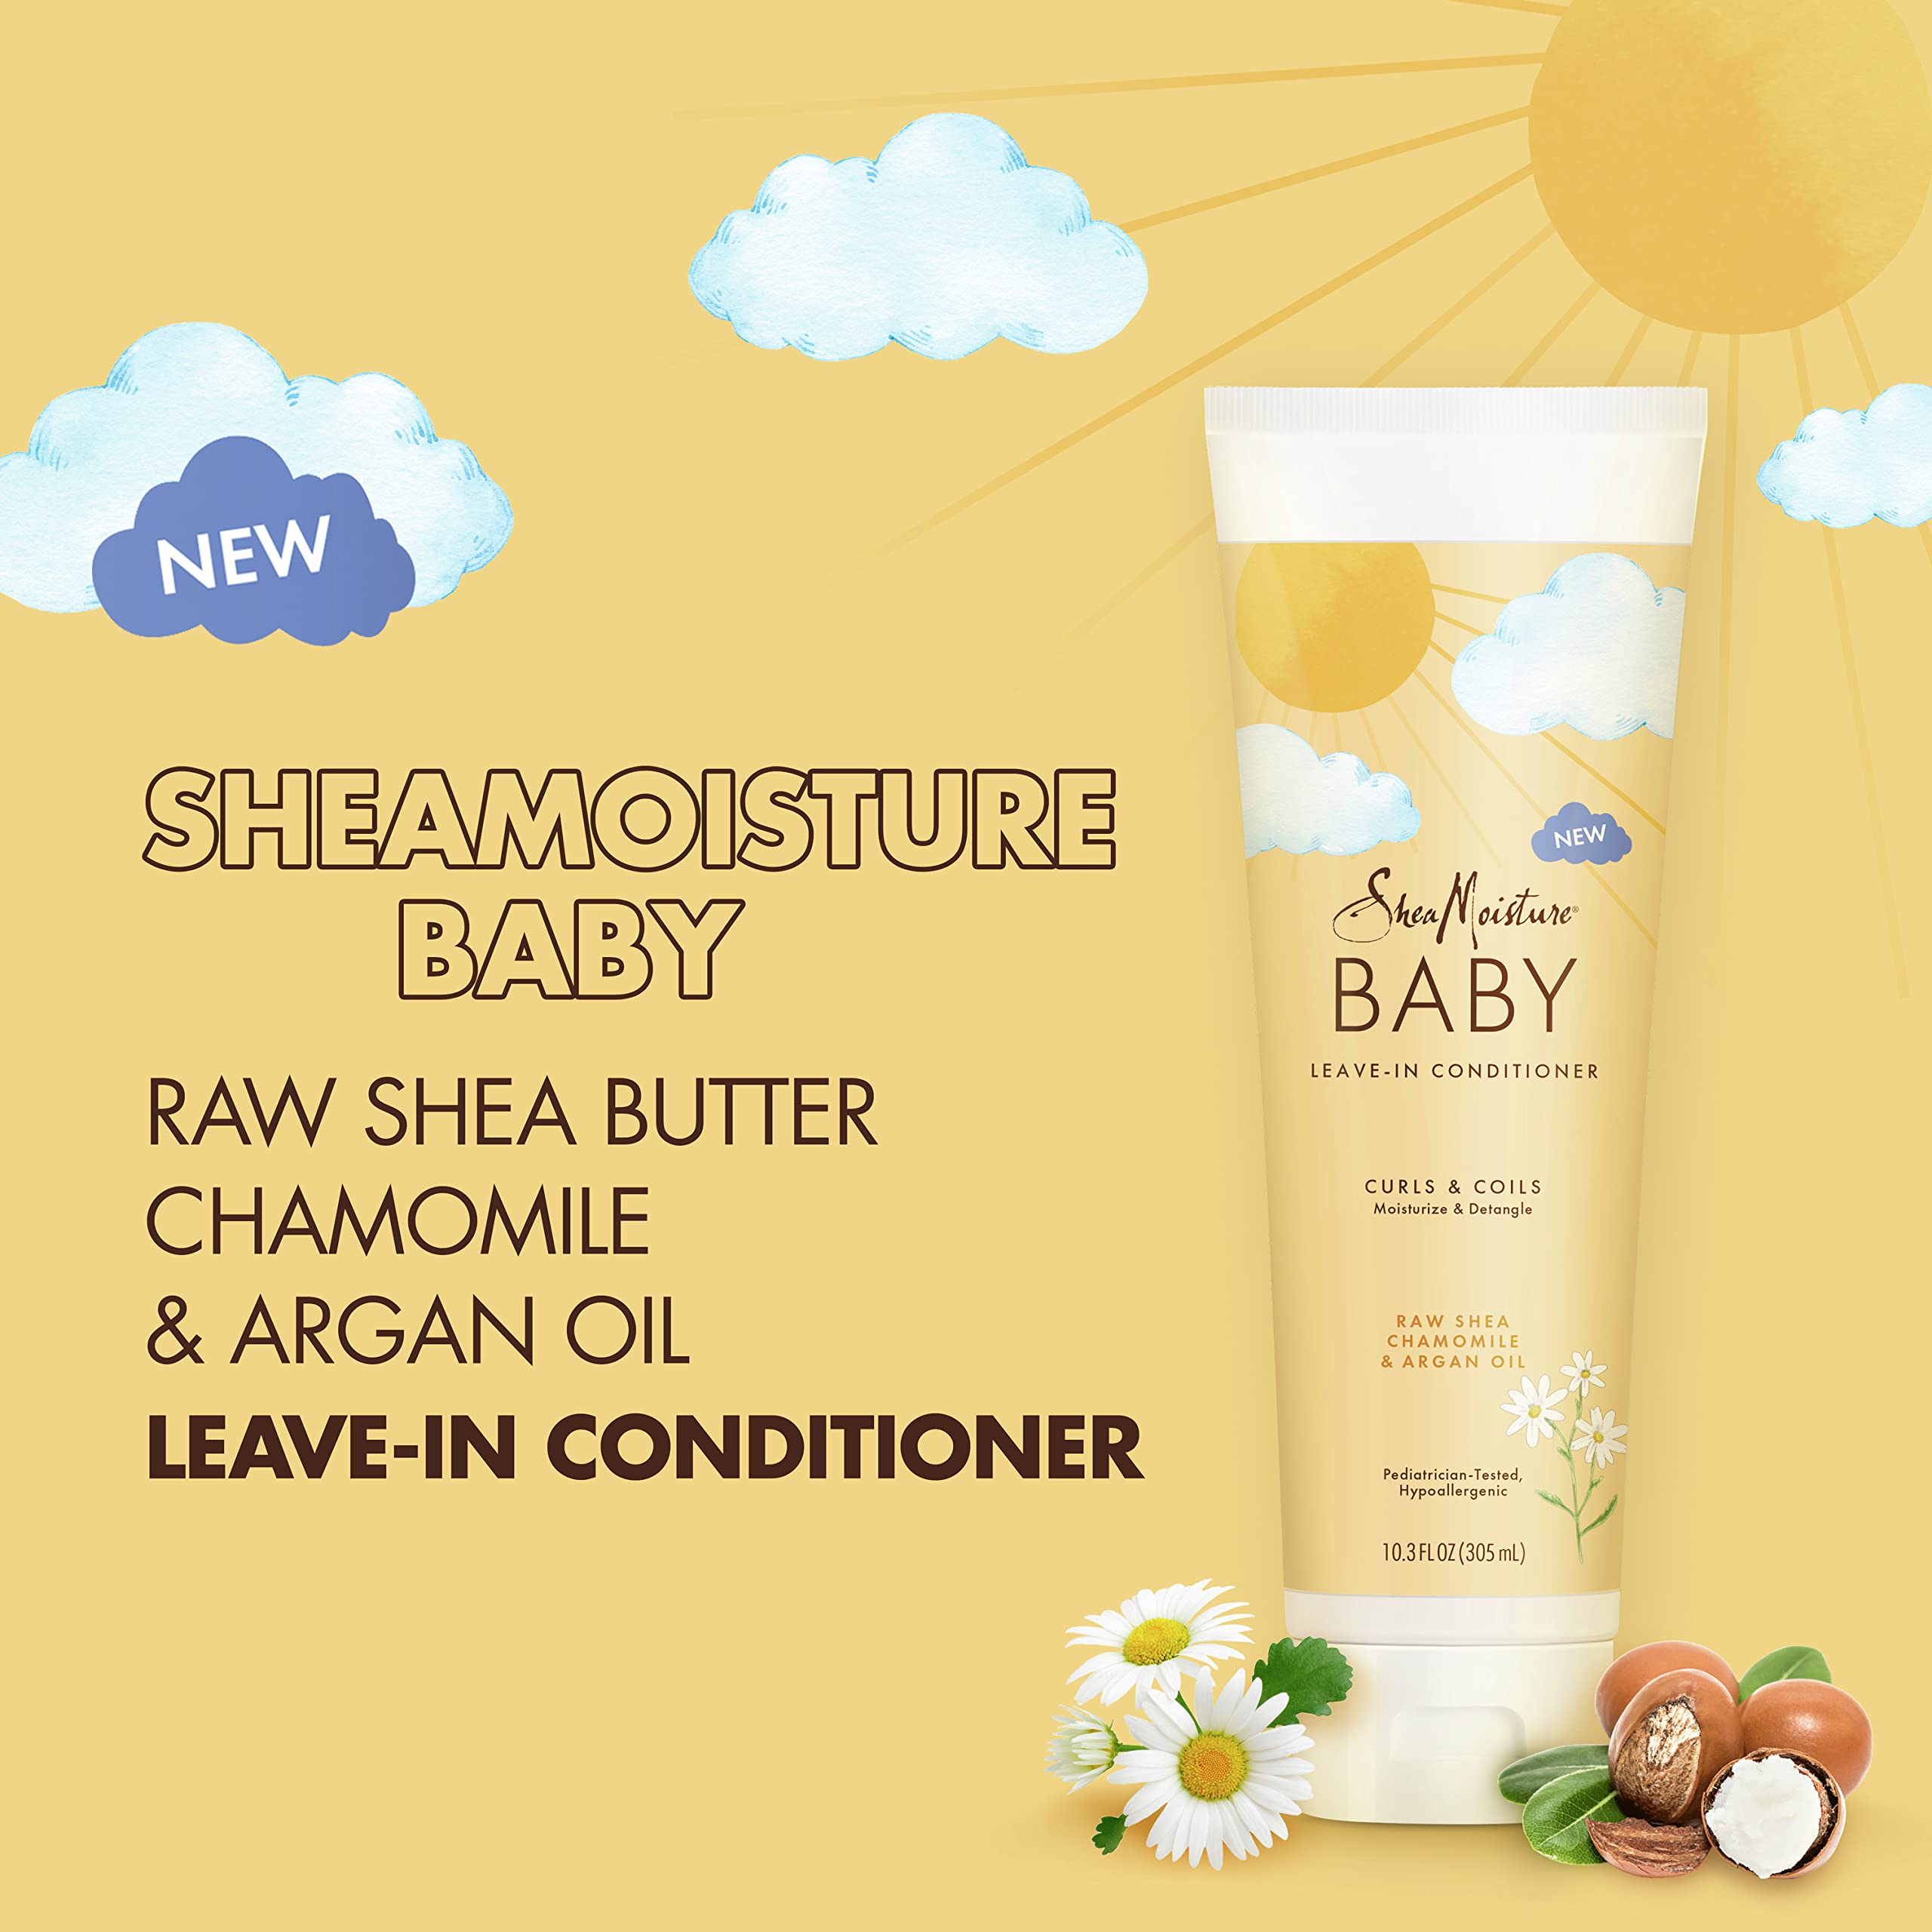 SheaMoisture Baby Leave-In Conditioner for Curly Hair Raw Shea, Chamomile and Argan Oil Moisturizes and Helps Detangle Delicate Curls and Coils 10.3 oz